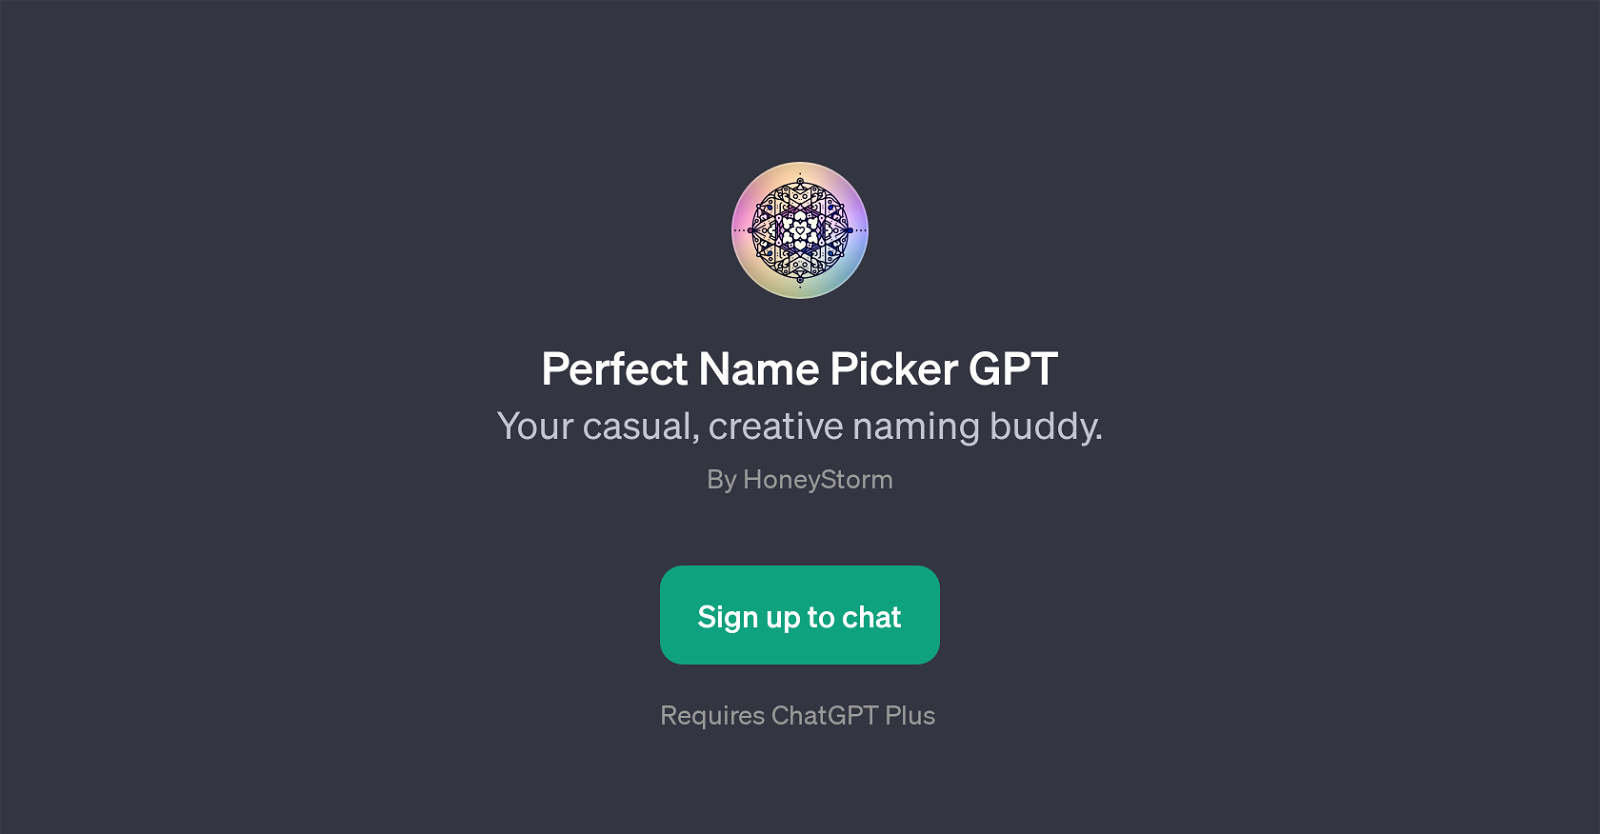 Perfect Name Picker GPT website